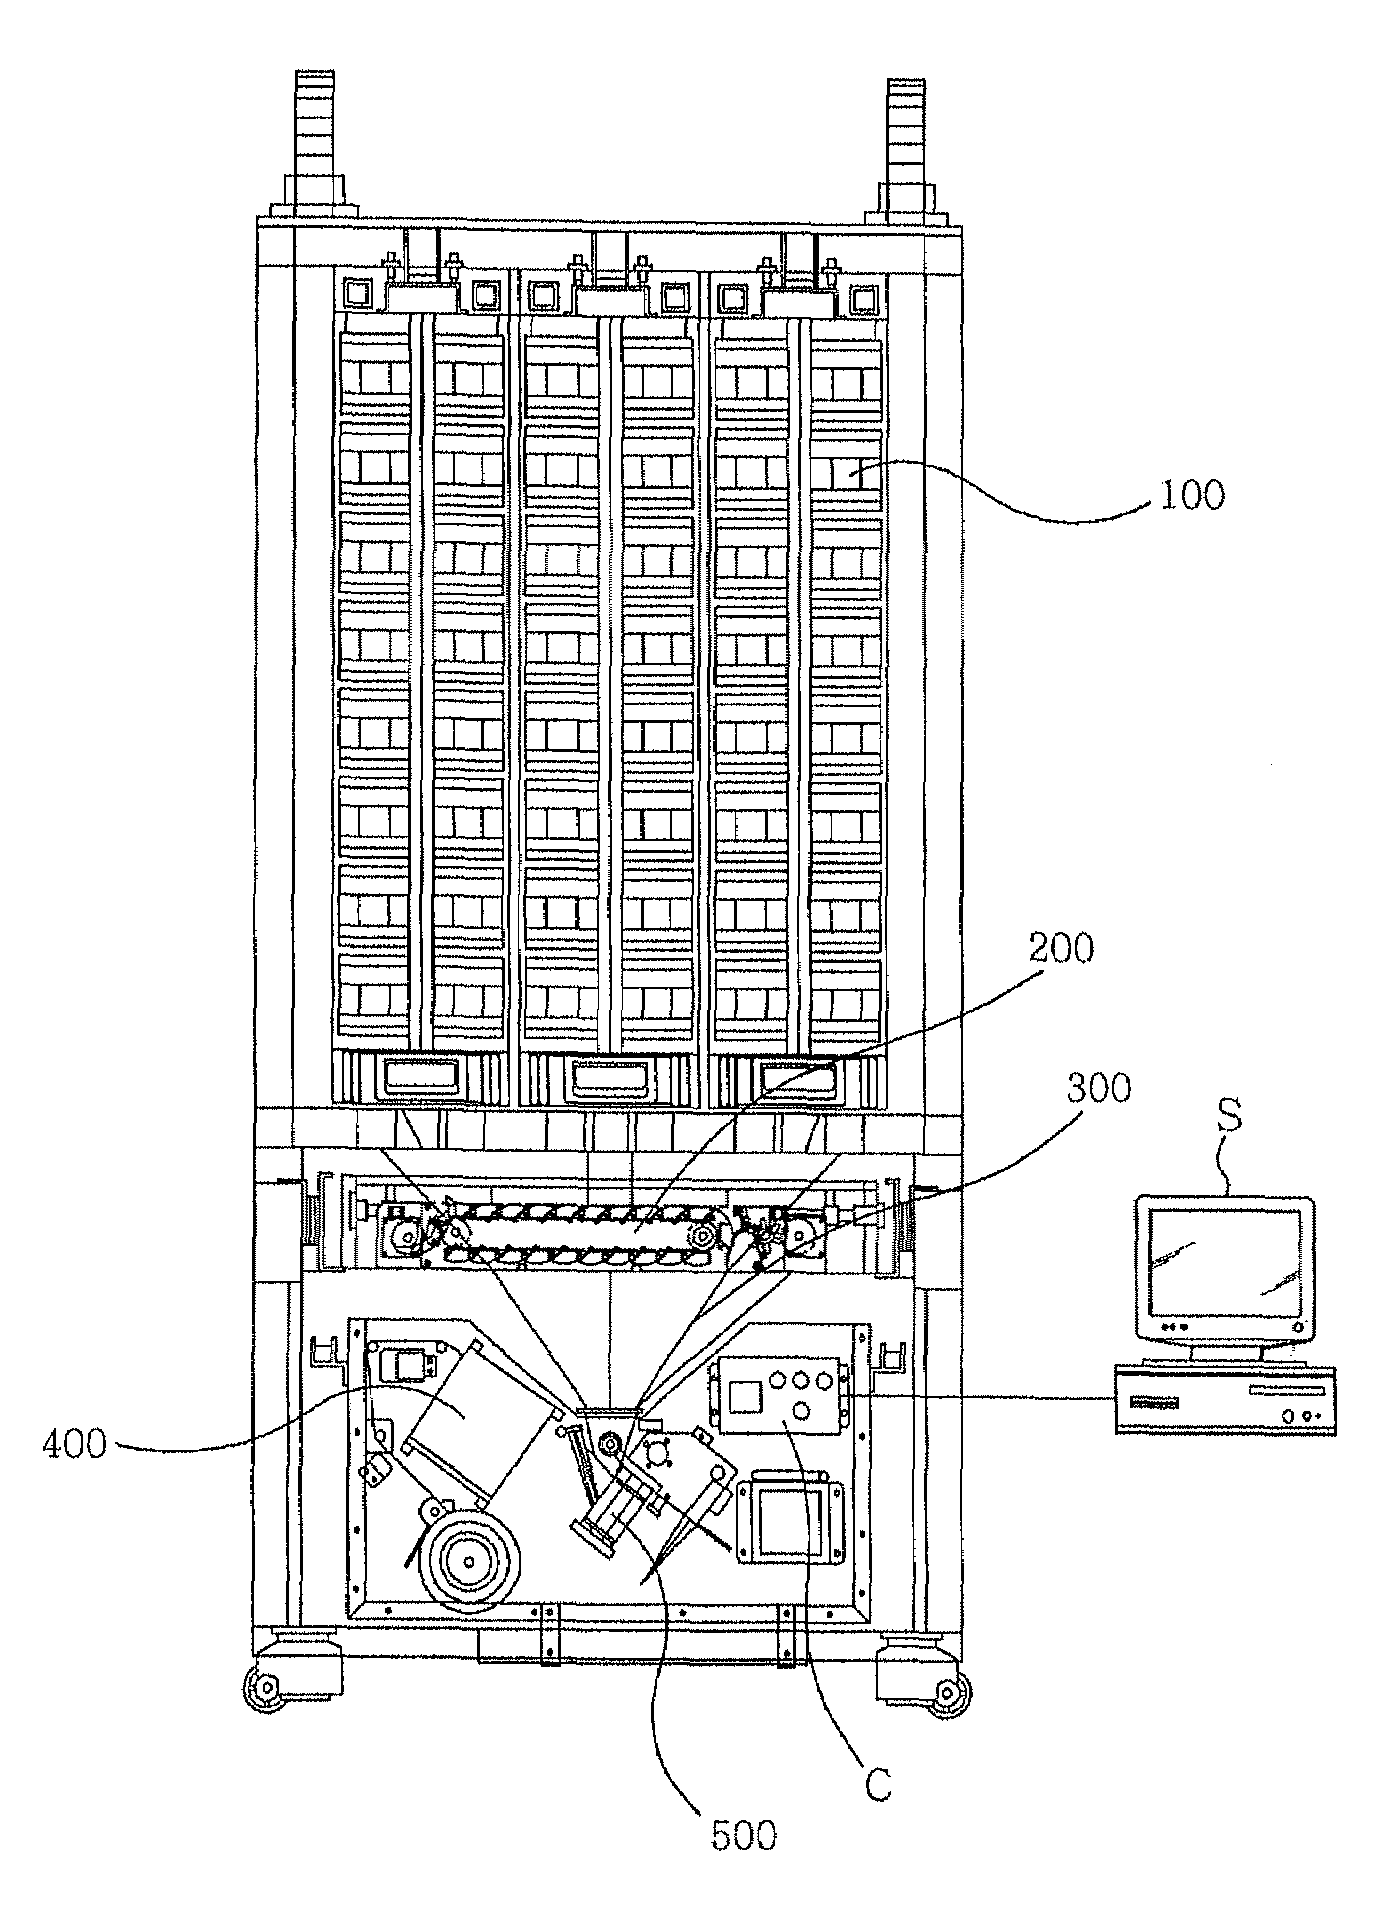 Division-packaging method and apparatus for automatic medicine packaging machine